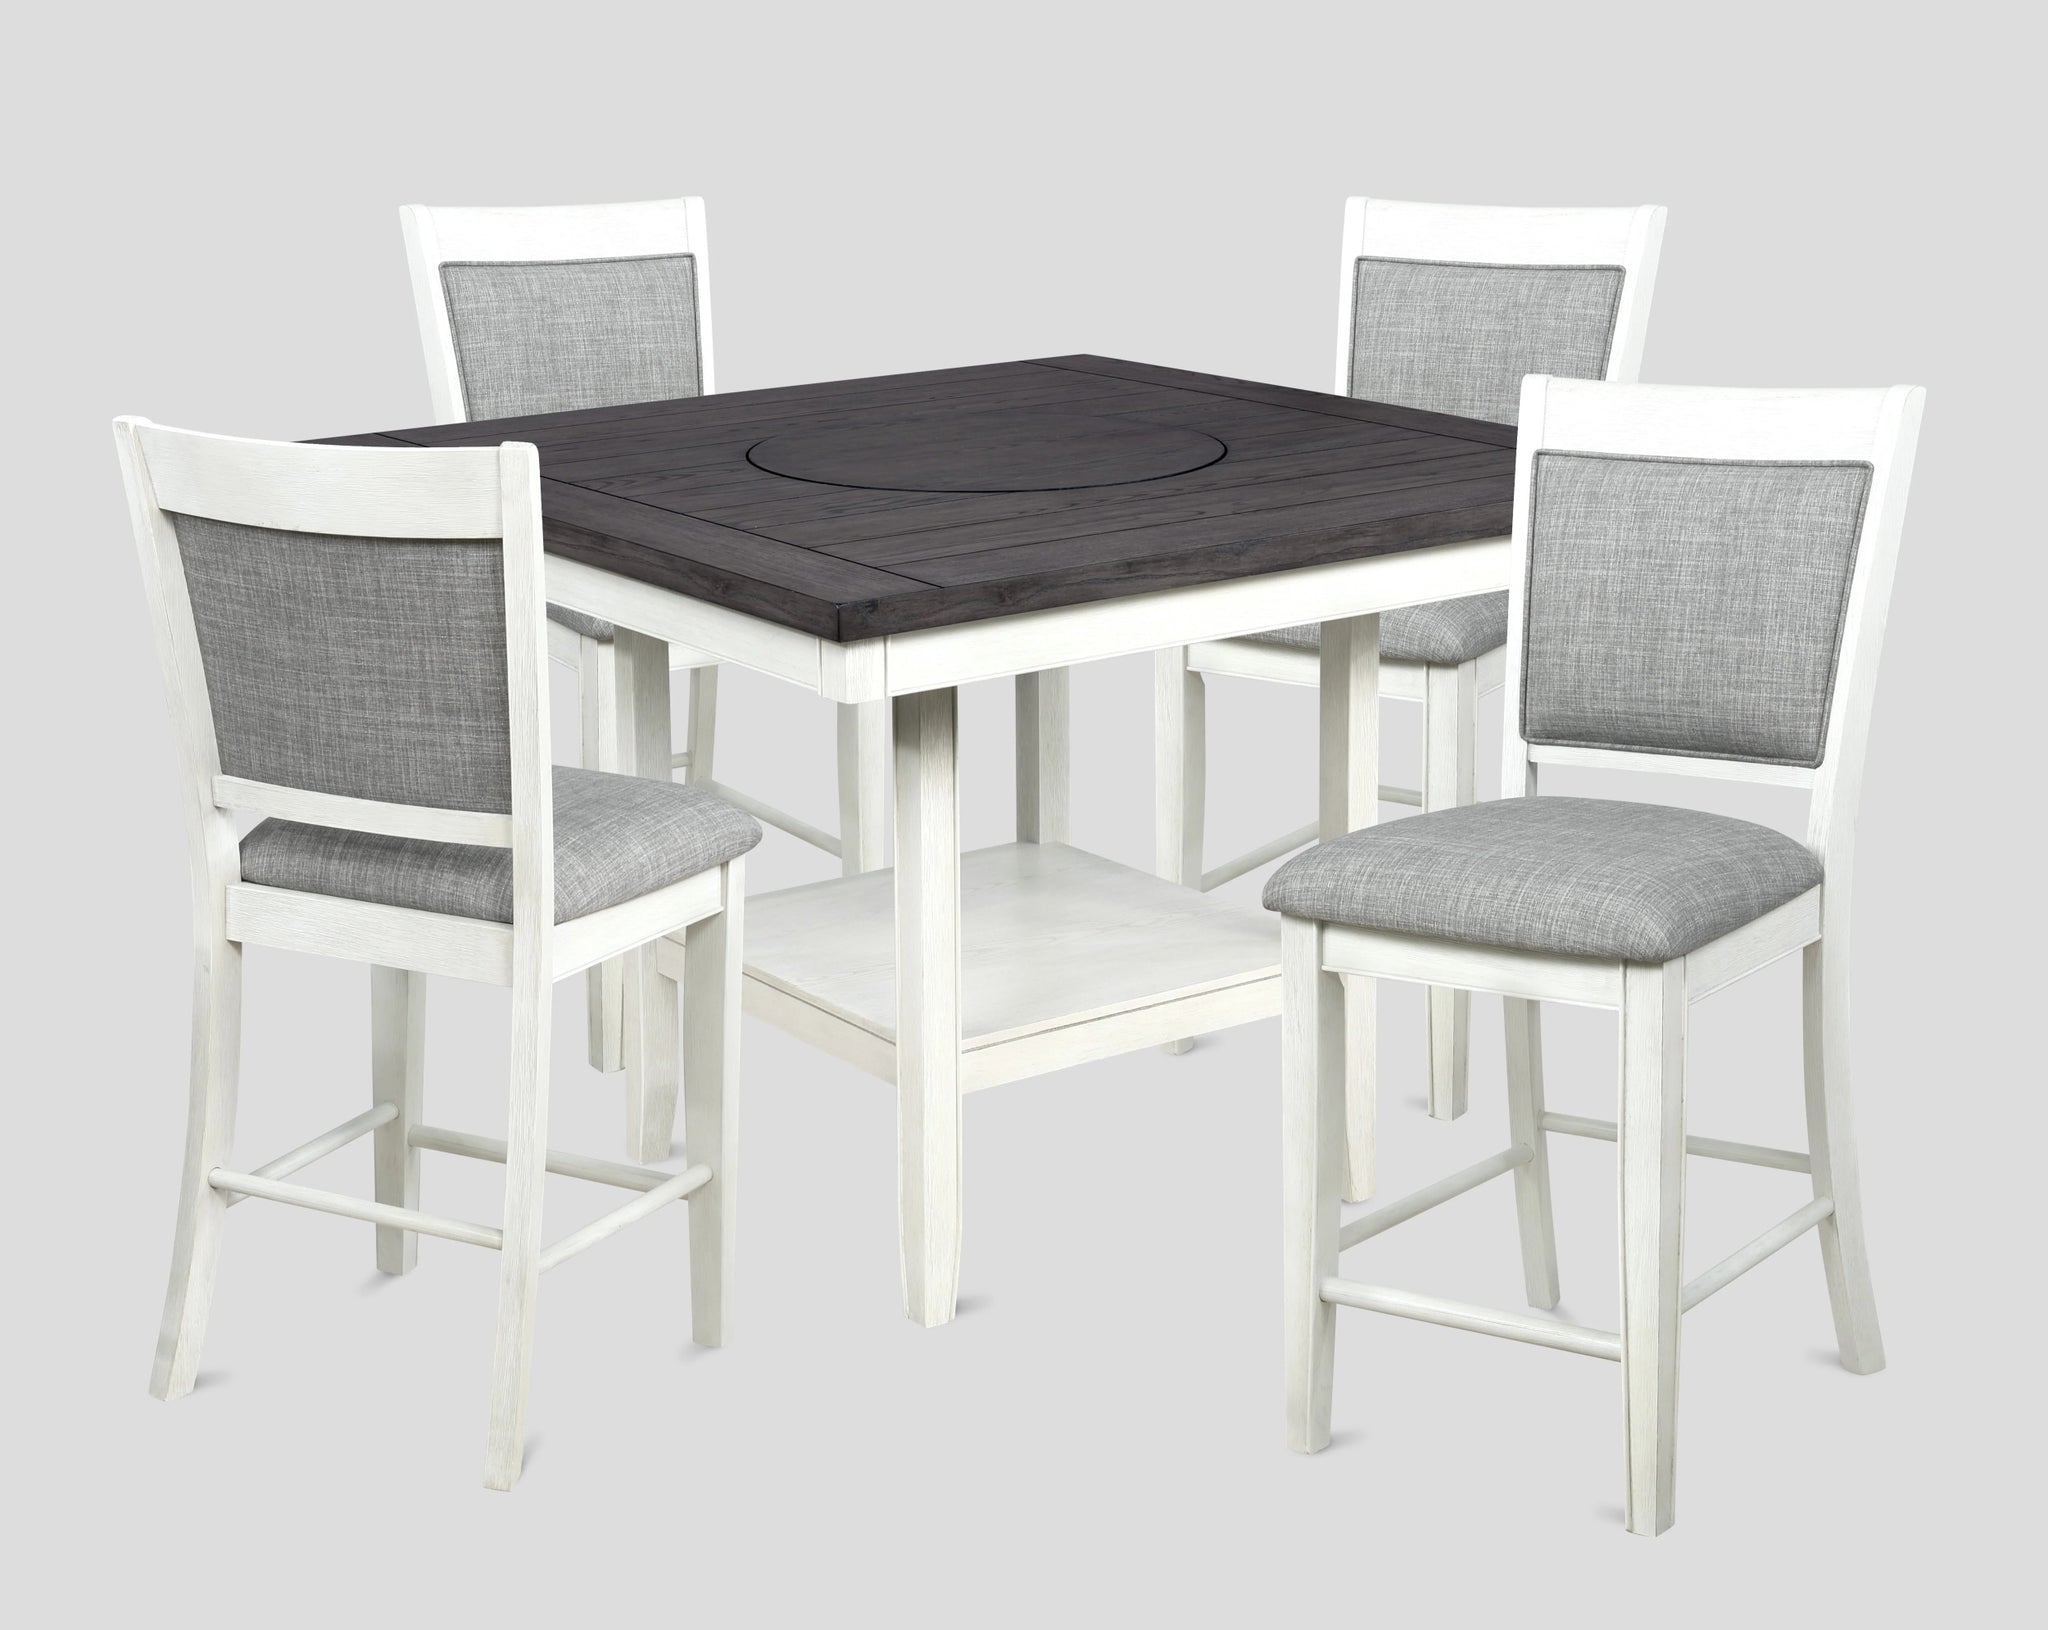 5pc Dining Set Contemporary Farmhouse Style Counter upholstered chair-wood-antique white+gray-seats